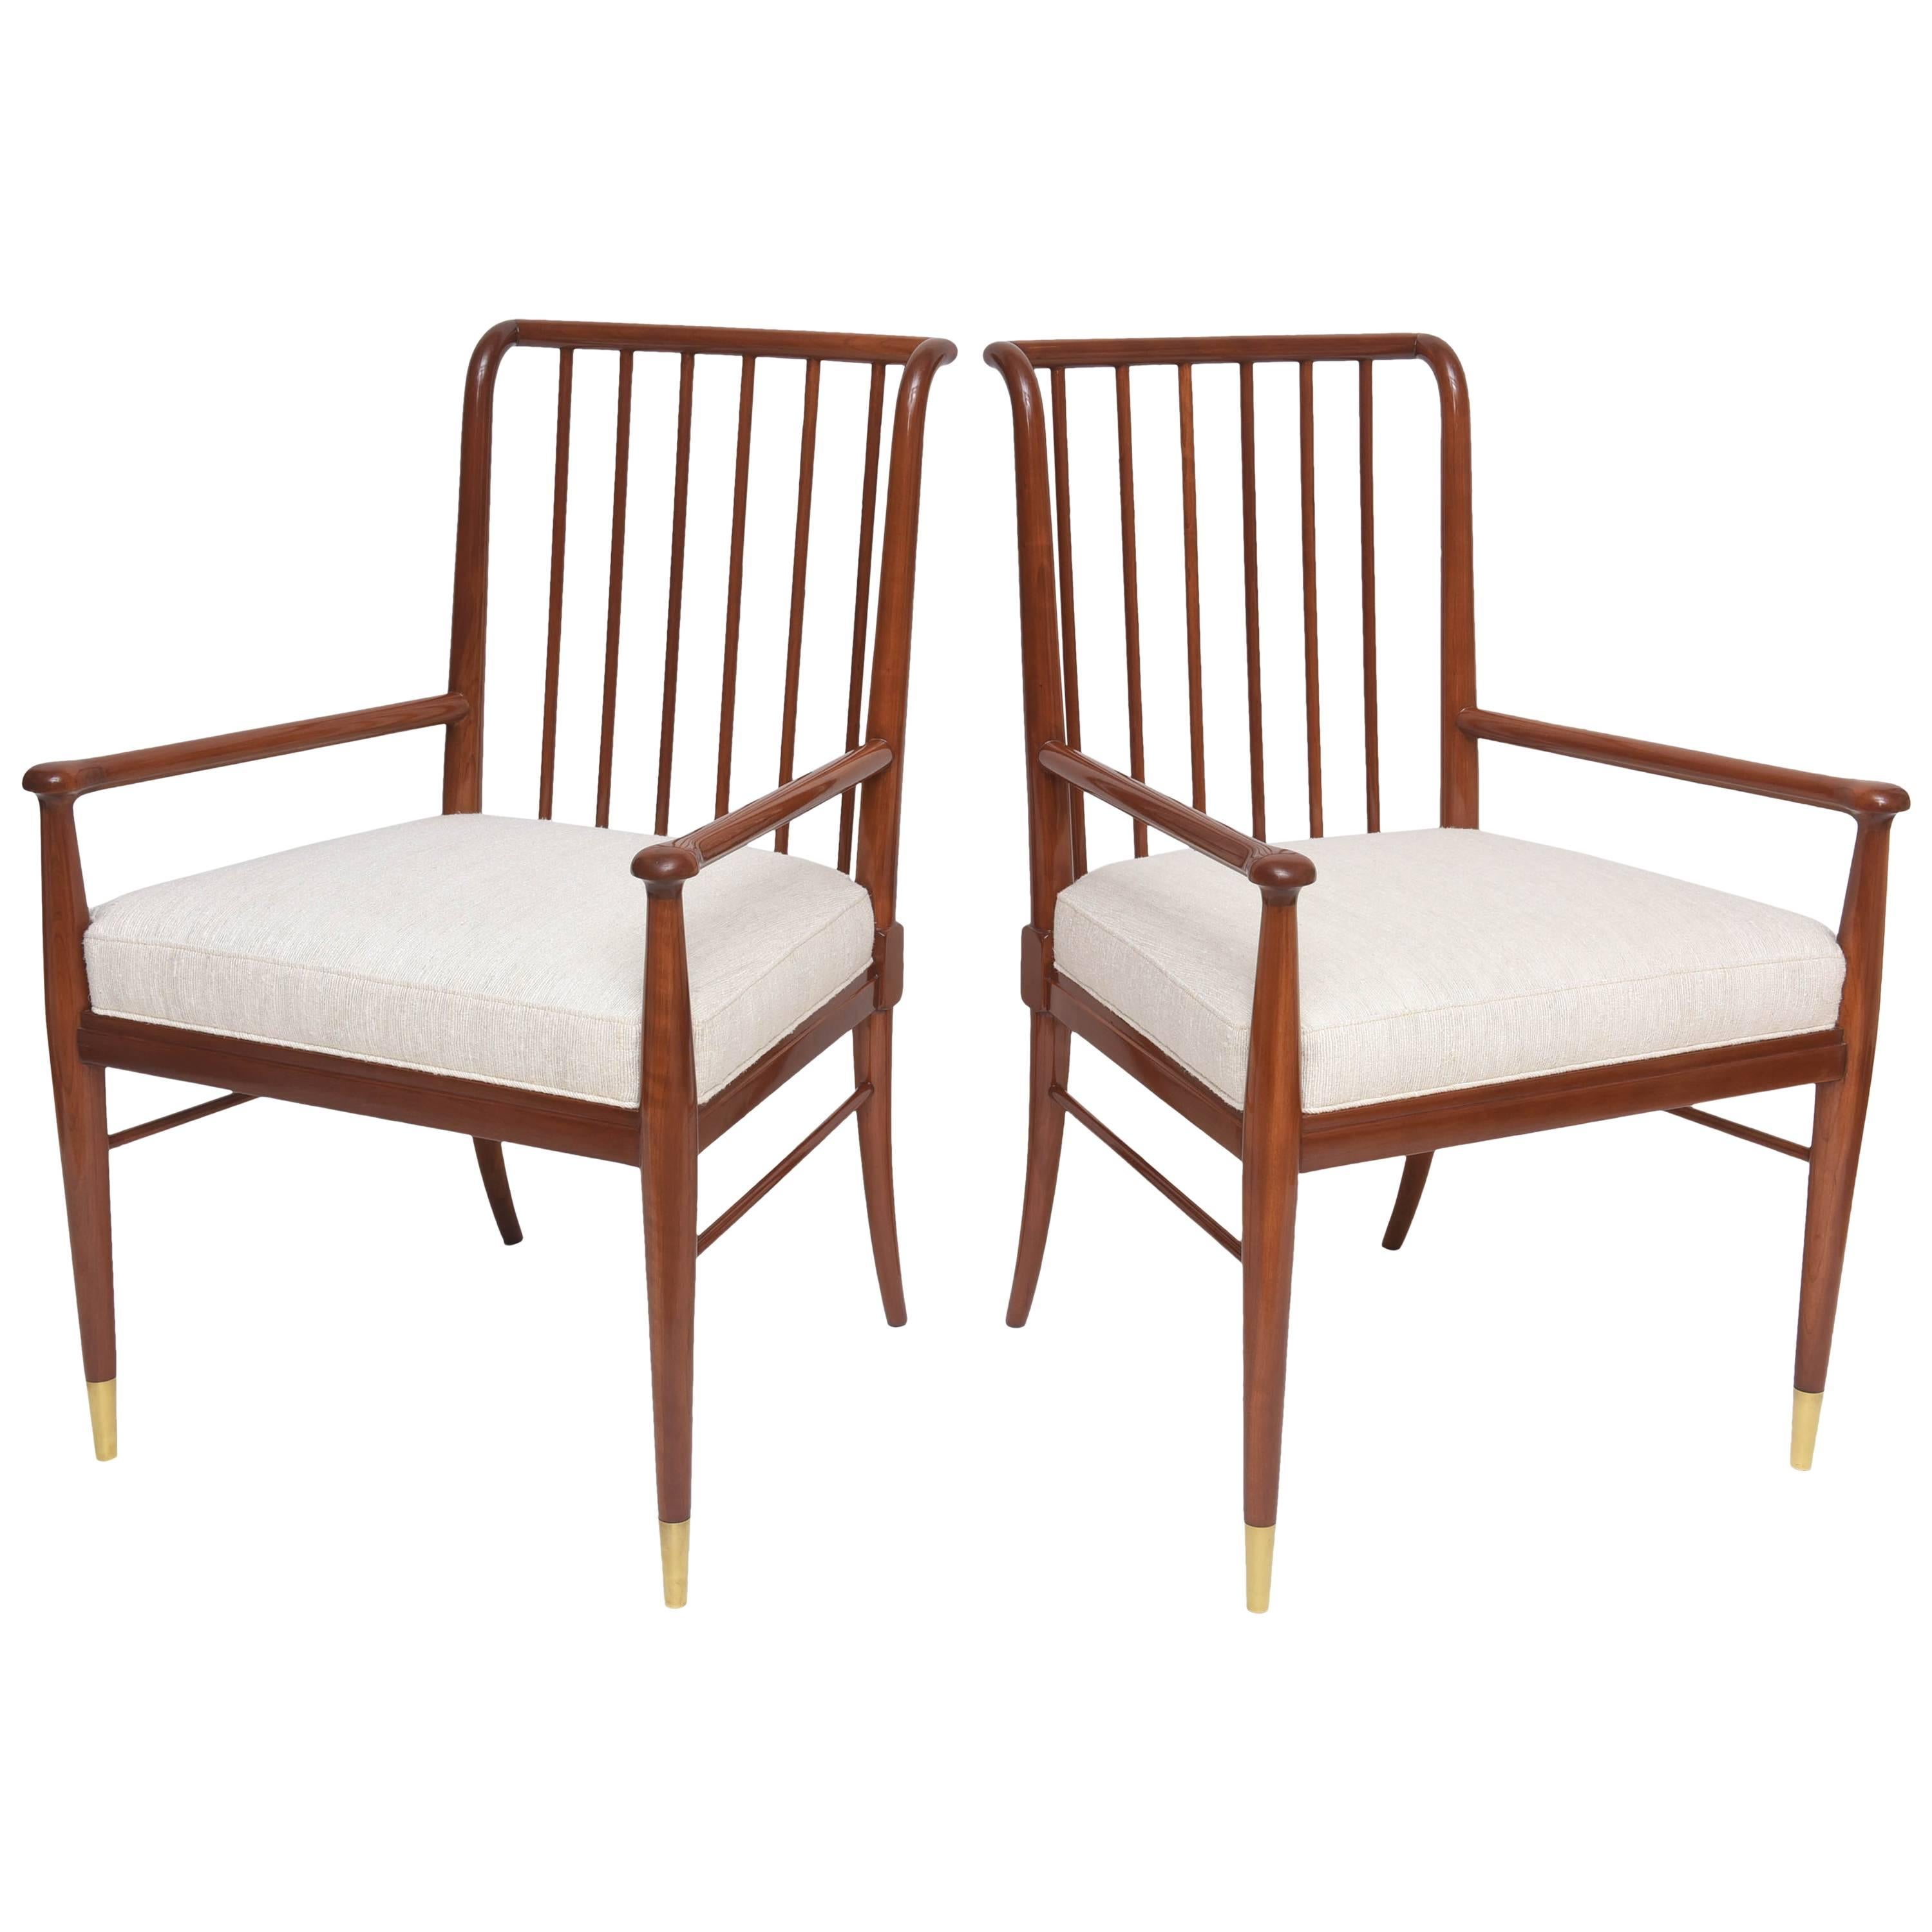 Pair of Spindle back Armchairs by Stuart Clingman for Widdicomb